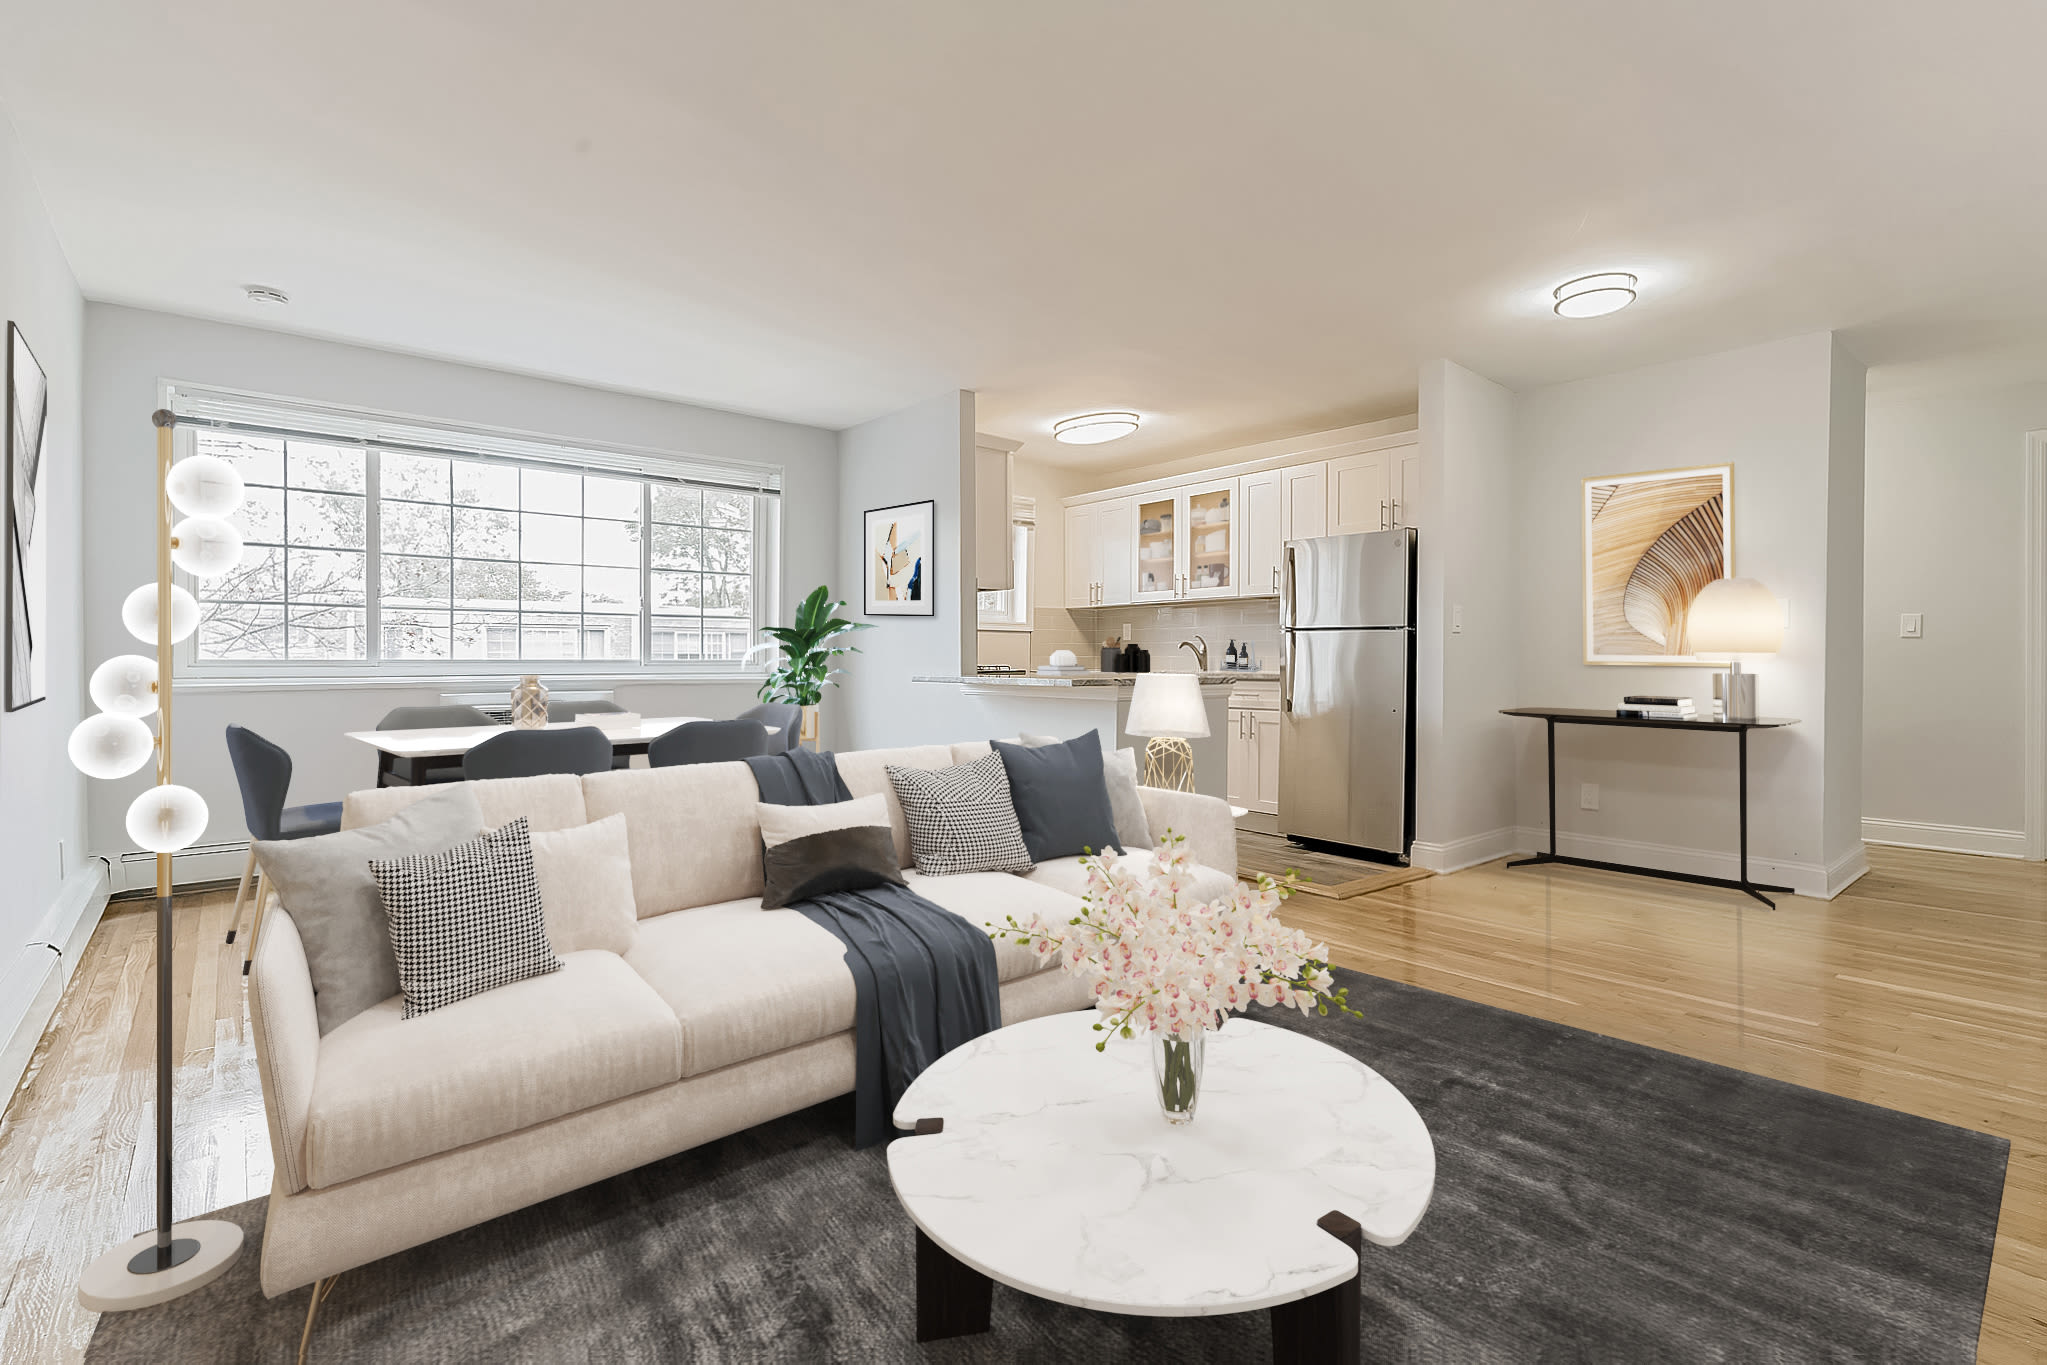 Living space at Eagle Rock Apartments at Carle Place in Carle Place, New York